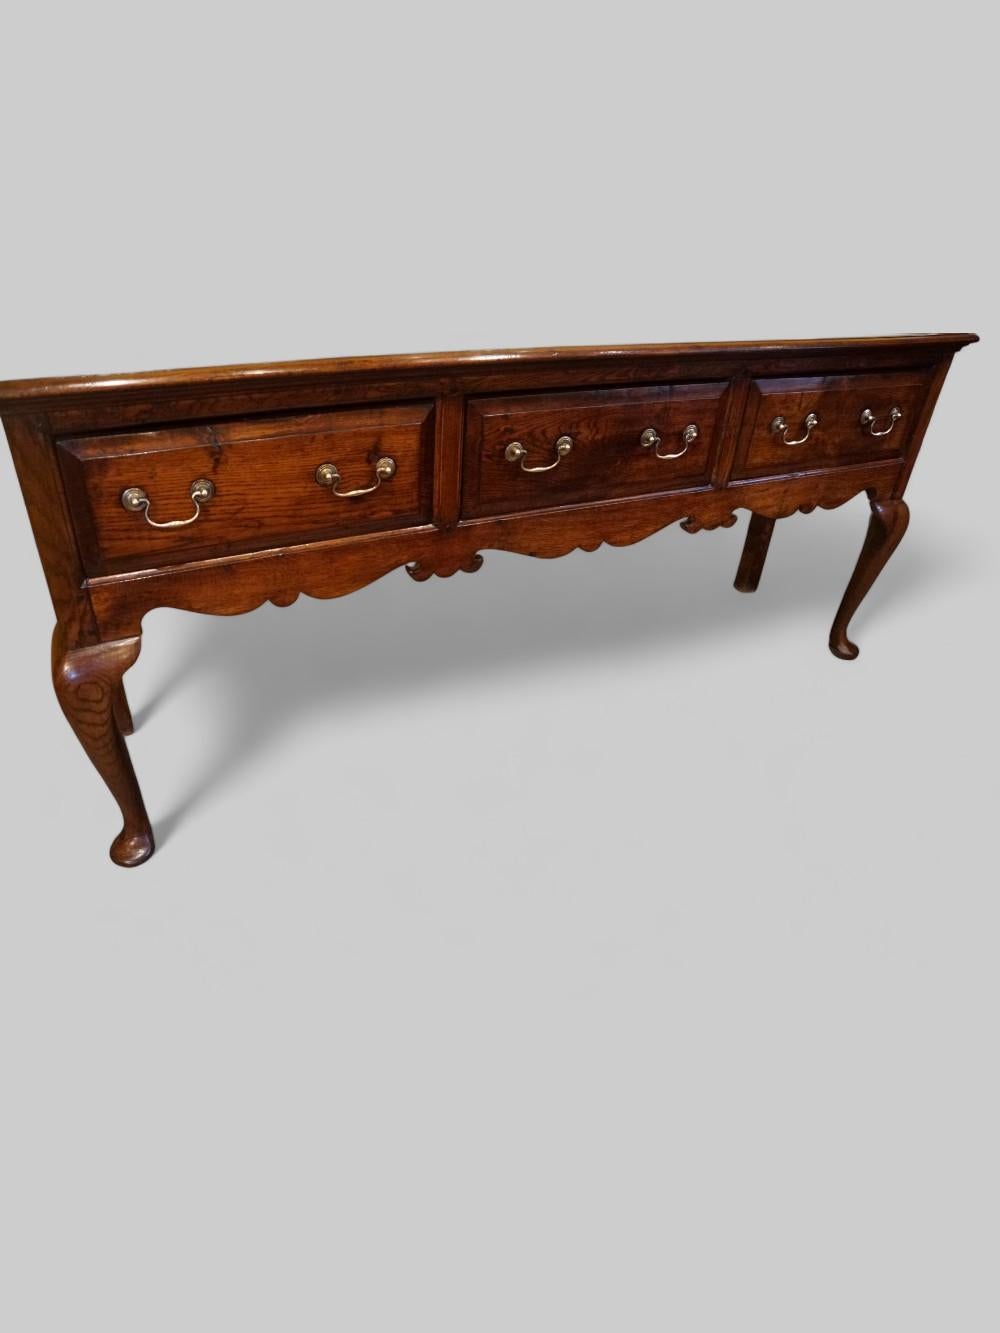 Antique oak cabriole leg dresser
This Antique oak cabriole leg dresser was made circa 1900.
It is fitted 3 drawers all with brass swing swan neck handles, the drawer fronts with the bevelled edges.
Under the drawers is the very attractive shaped